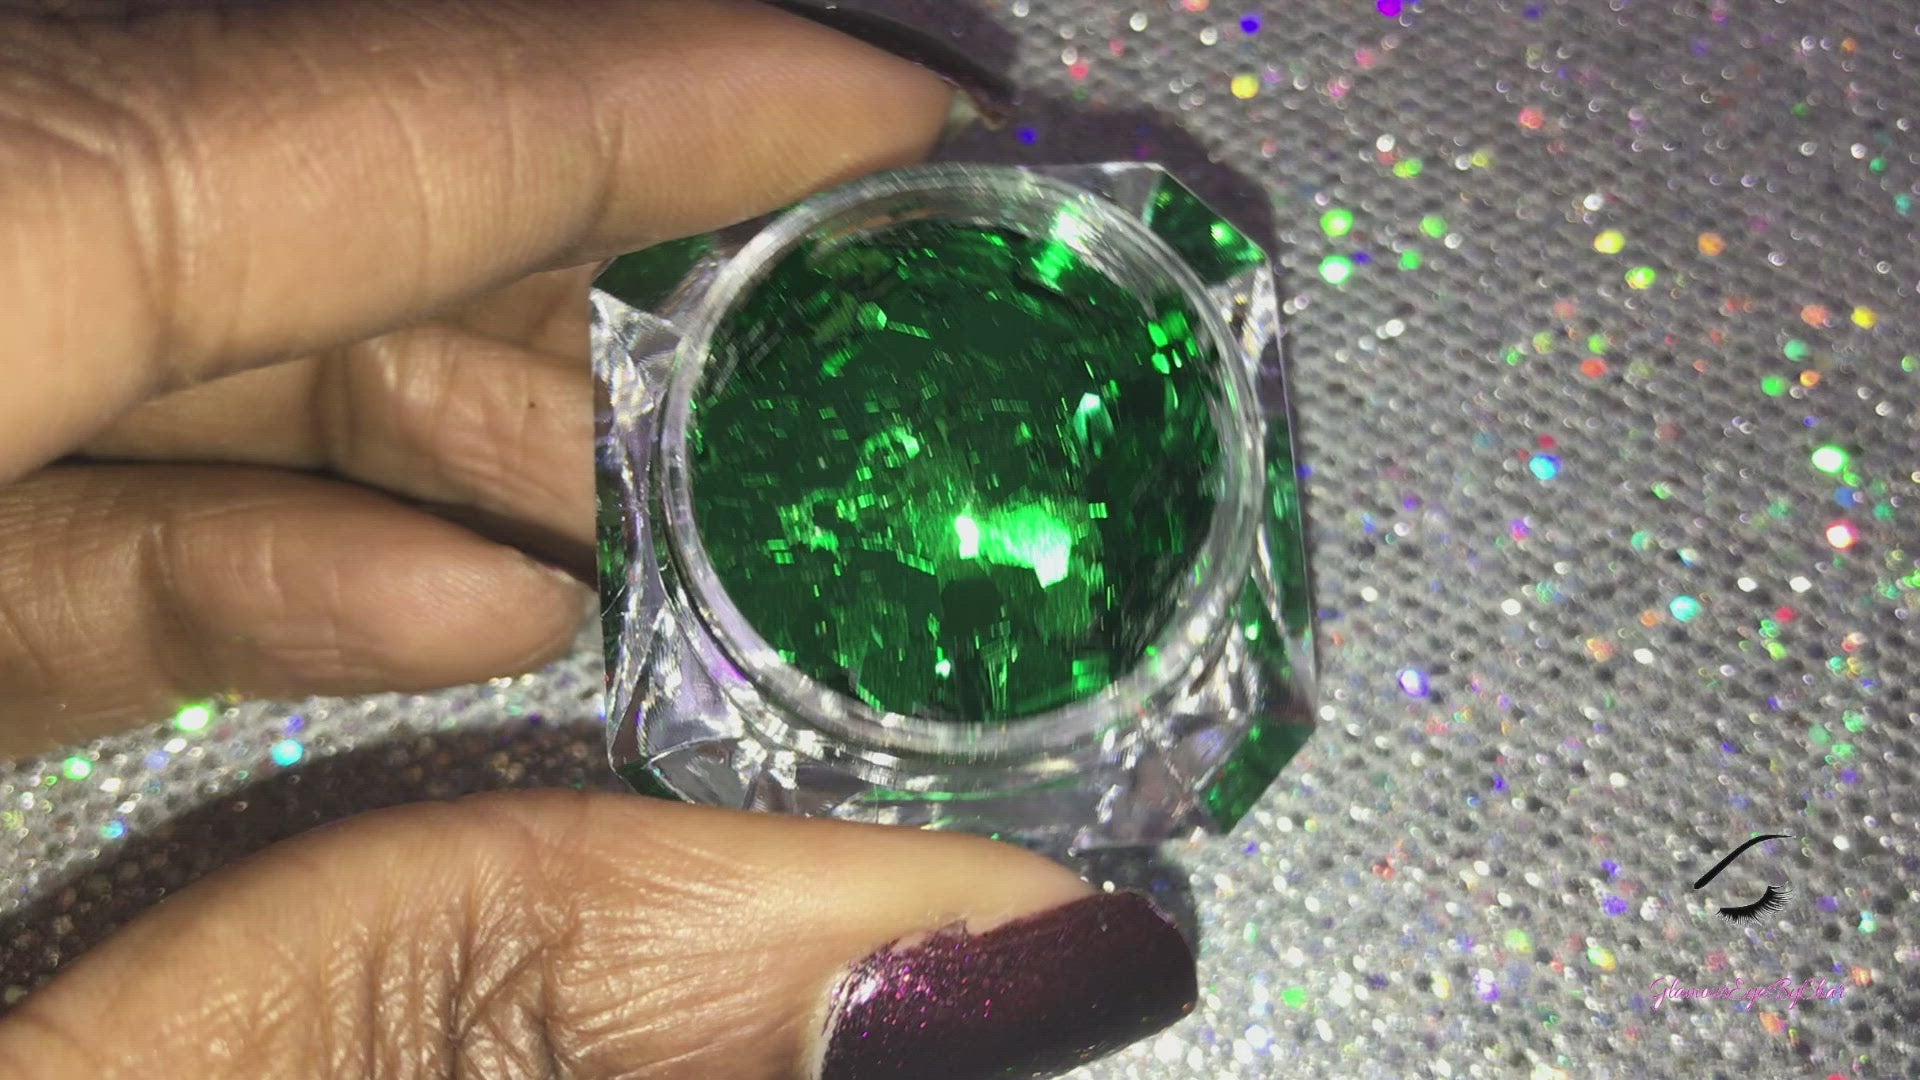 This glitter is called Envy and is part of the super chunky glitter collection.  It consists of emerald green glitter with a beautiful sparkle. Envy can be used for your face, body, hair and nails.  Comes in 5g jars only.   